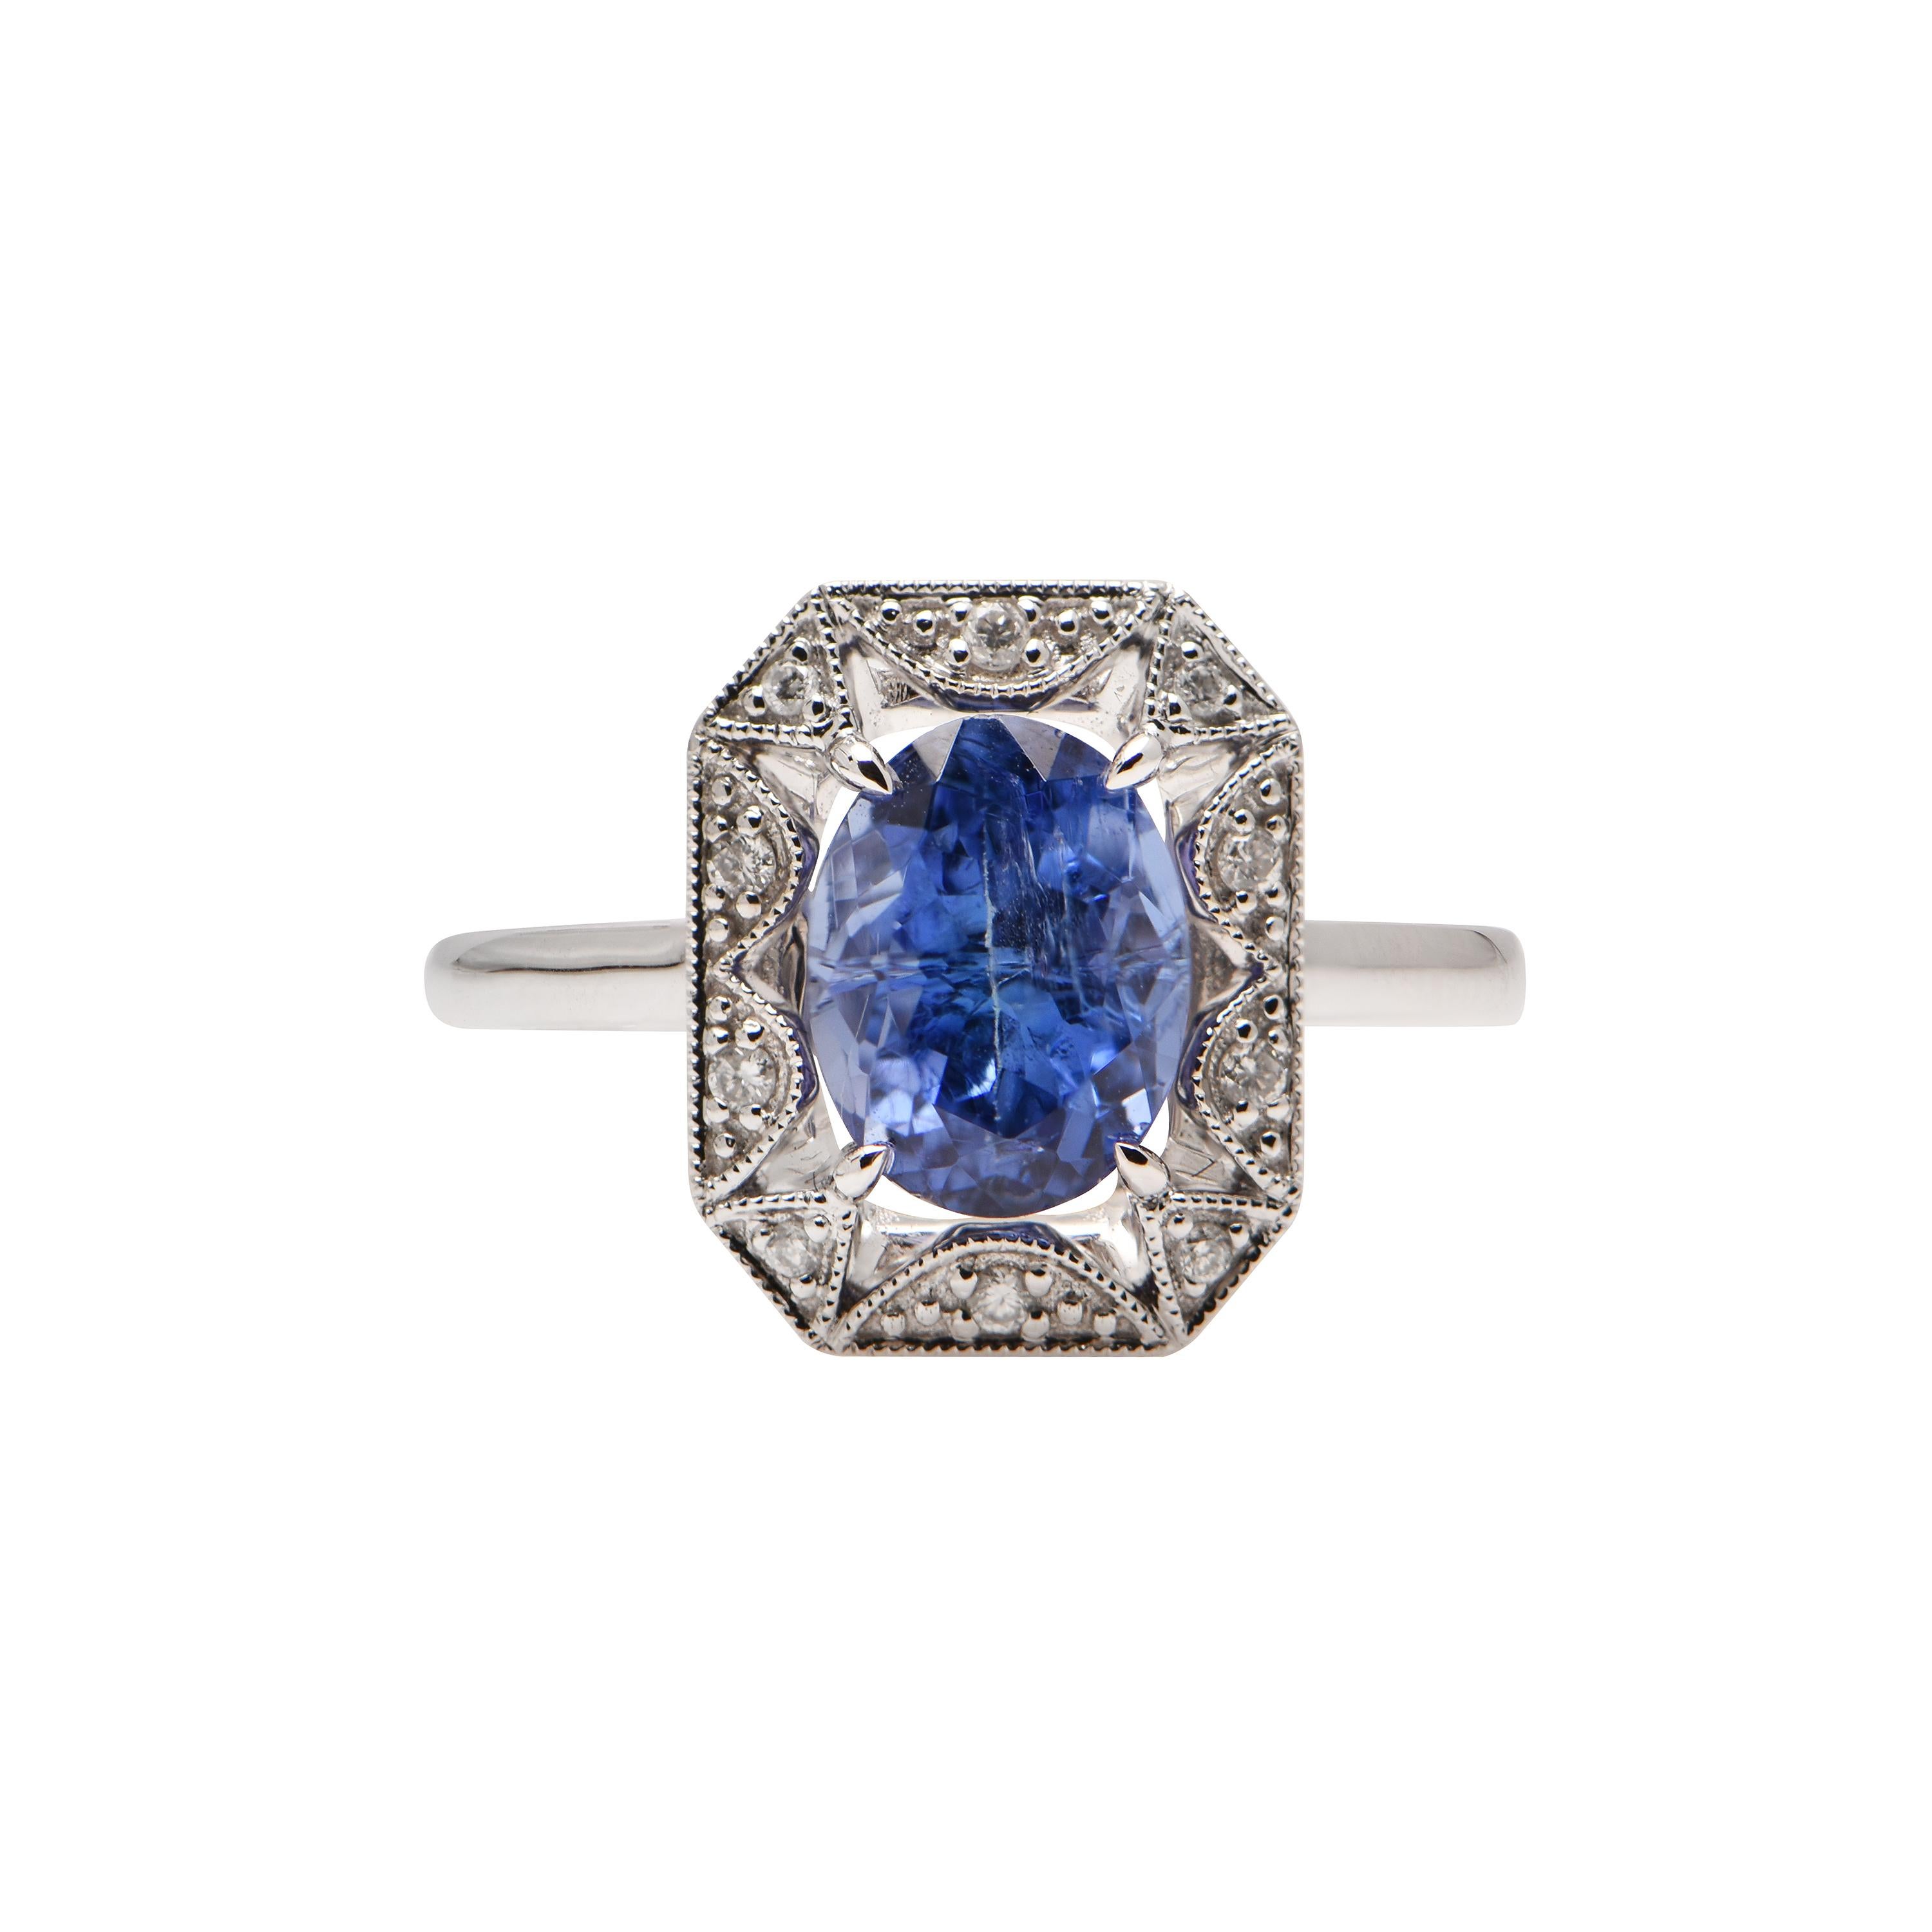 An 18ct White Gold ring showcasing a Tanzanite (2.26ct), and 10 Diamonds totalling 0.08ct. This ring comes with a valuation certificate.